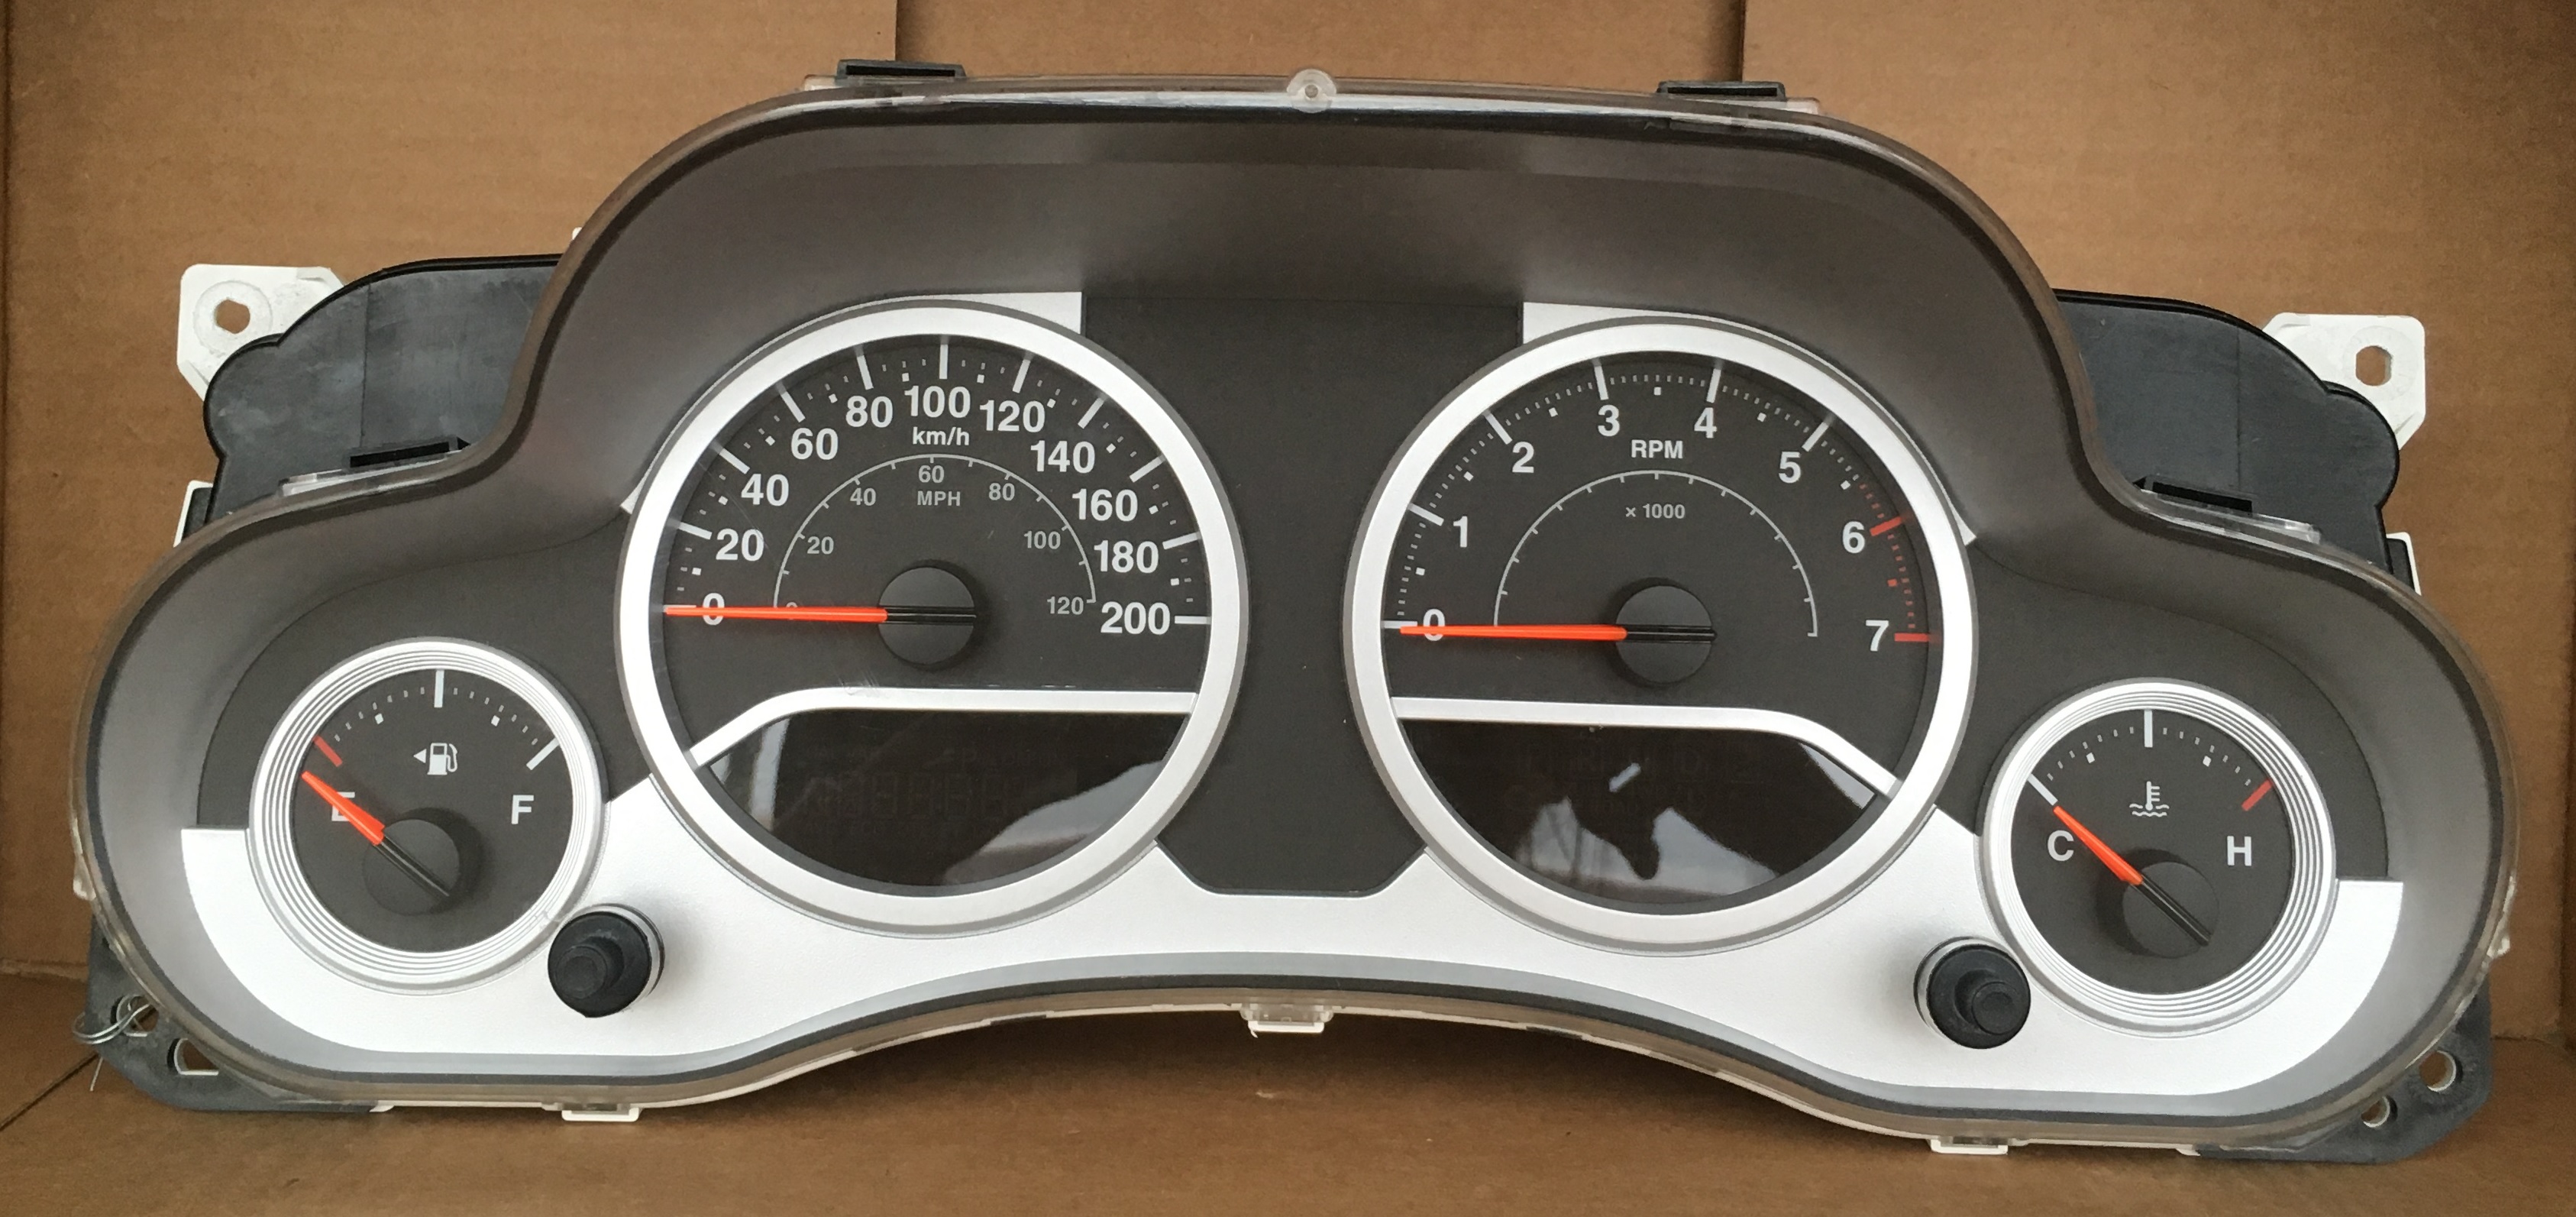 2008 JEEP WRANGLER USED DASHBOARD INSTRUMENT CLUSTER FOR SALE (KM/H) - DASHBOARD  INSTRUMENT CLUSTER